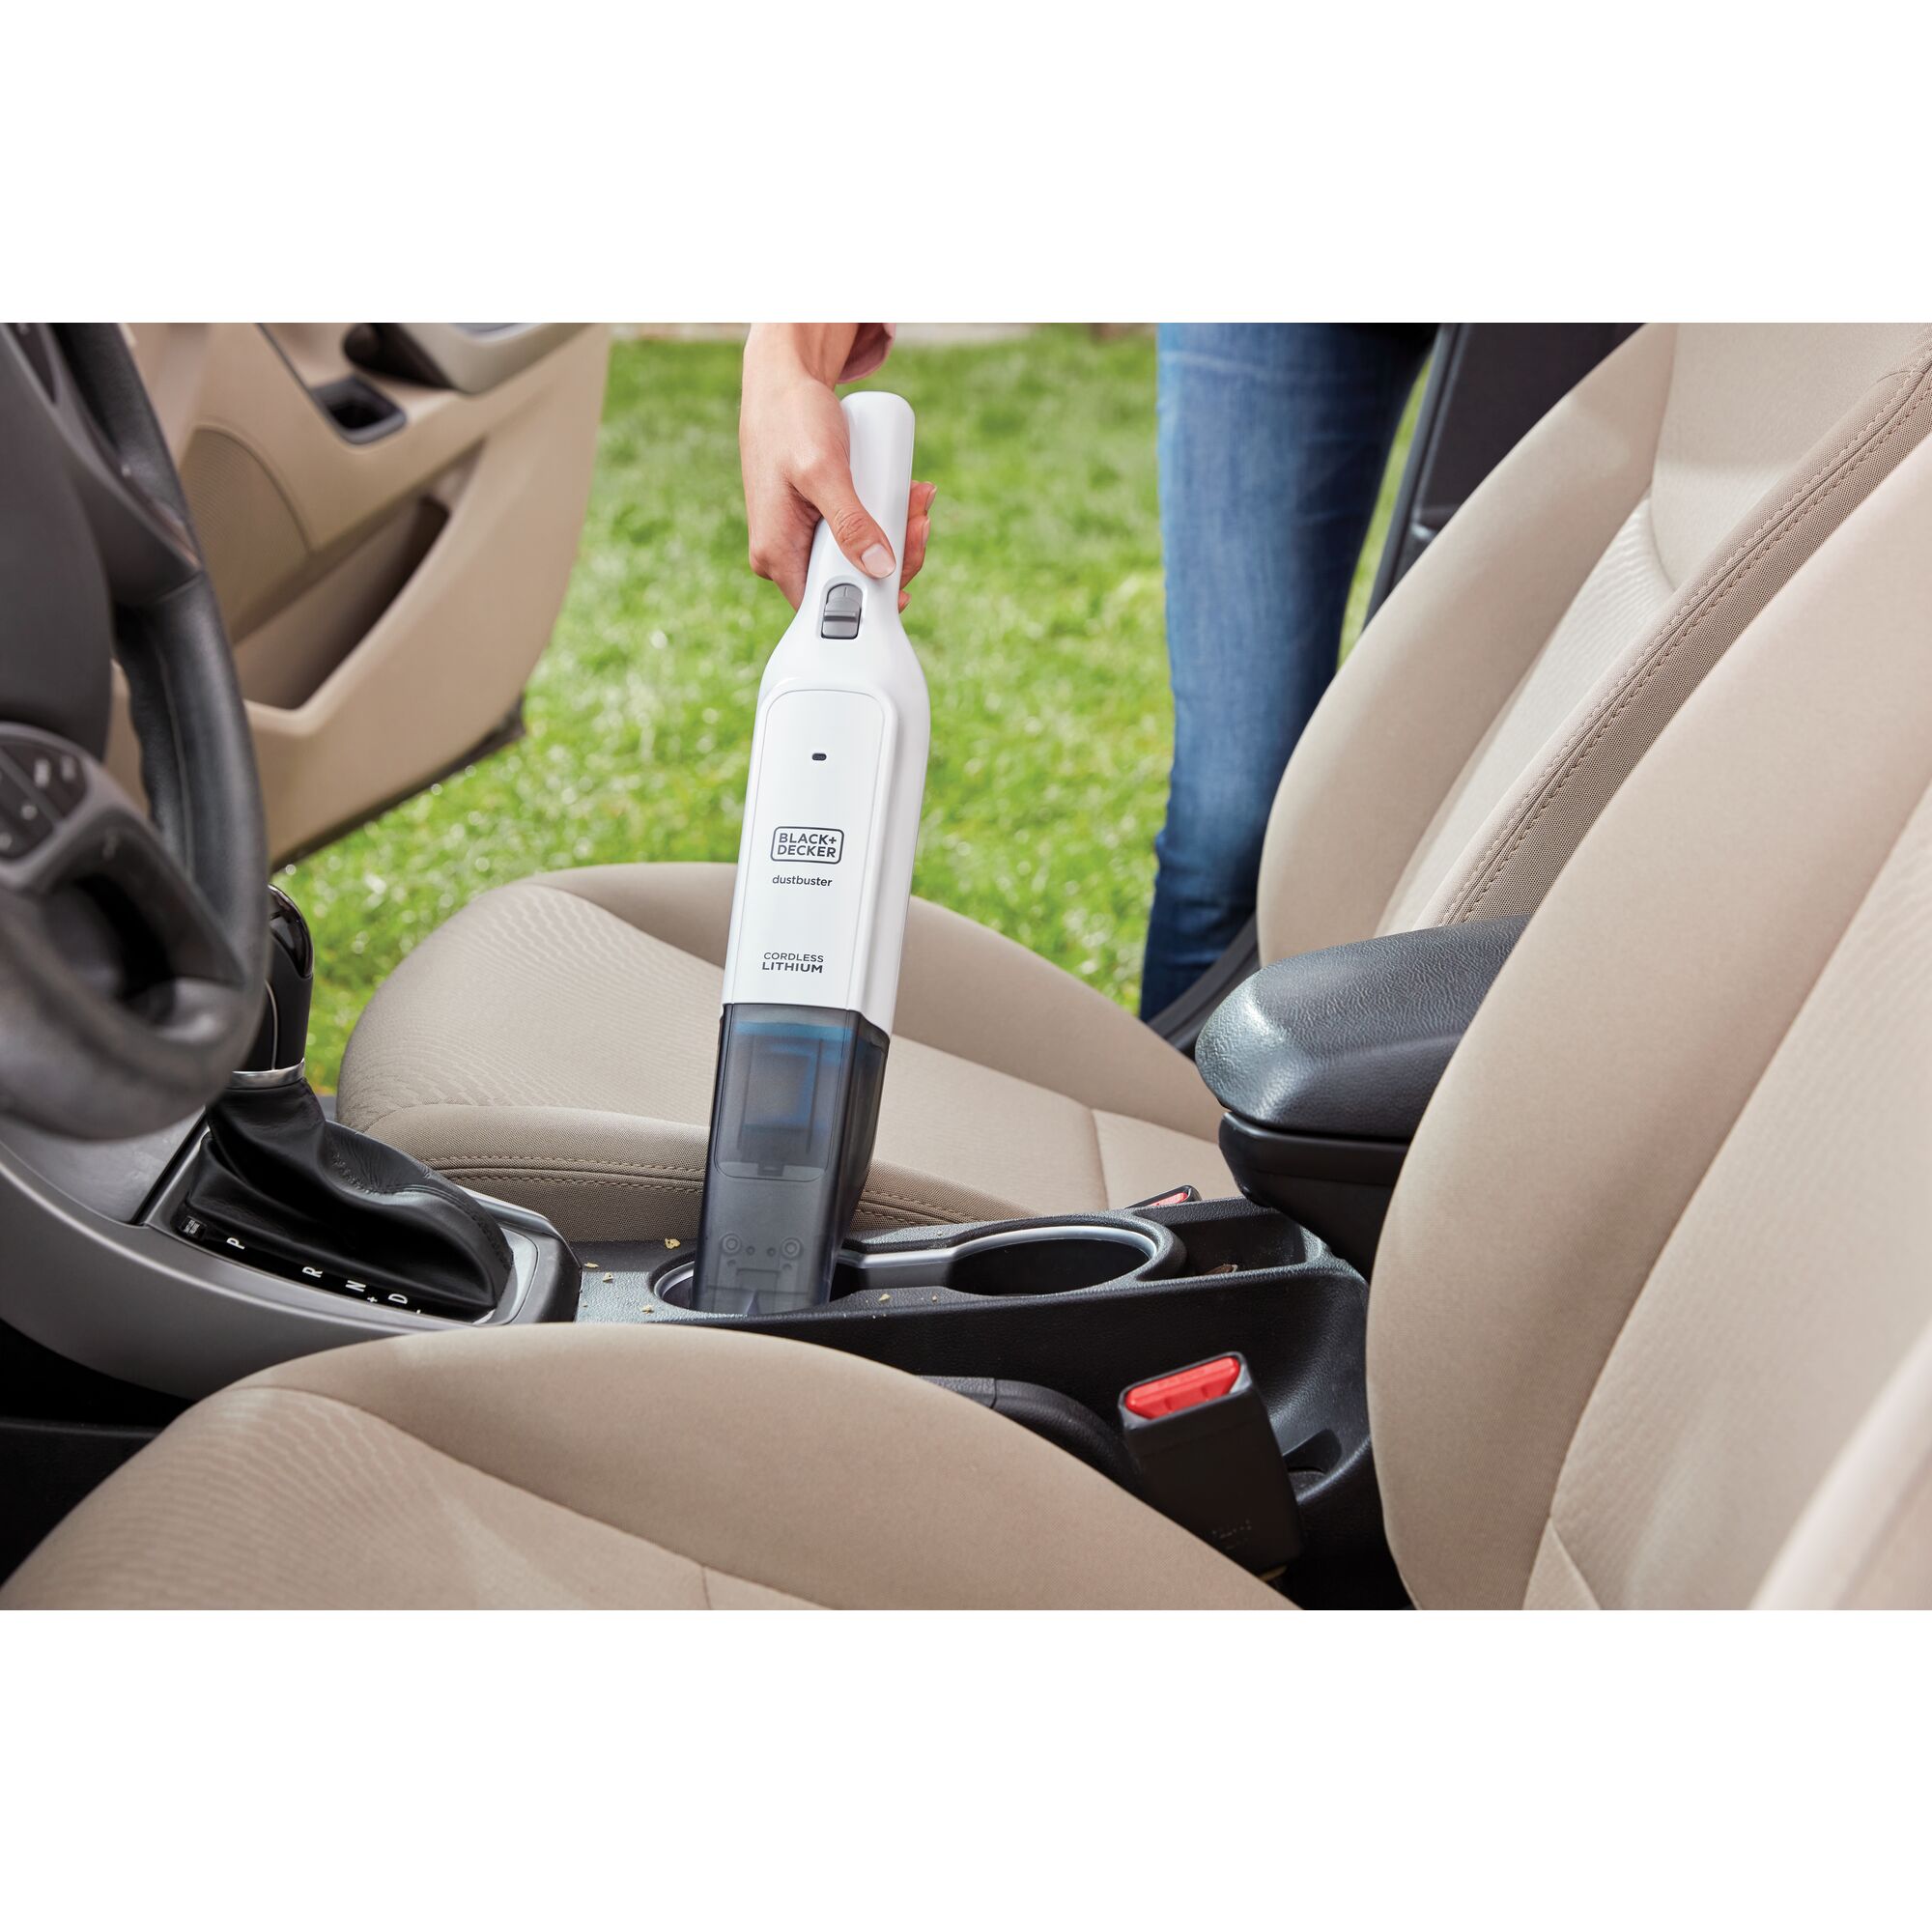 dustbuster Advanced Clean Cordless Hand Vacuum being used to clean cup holders in car.